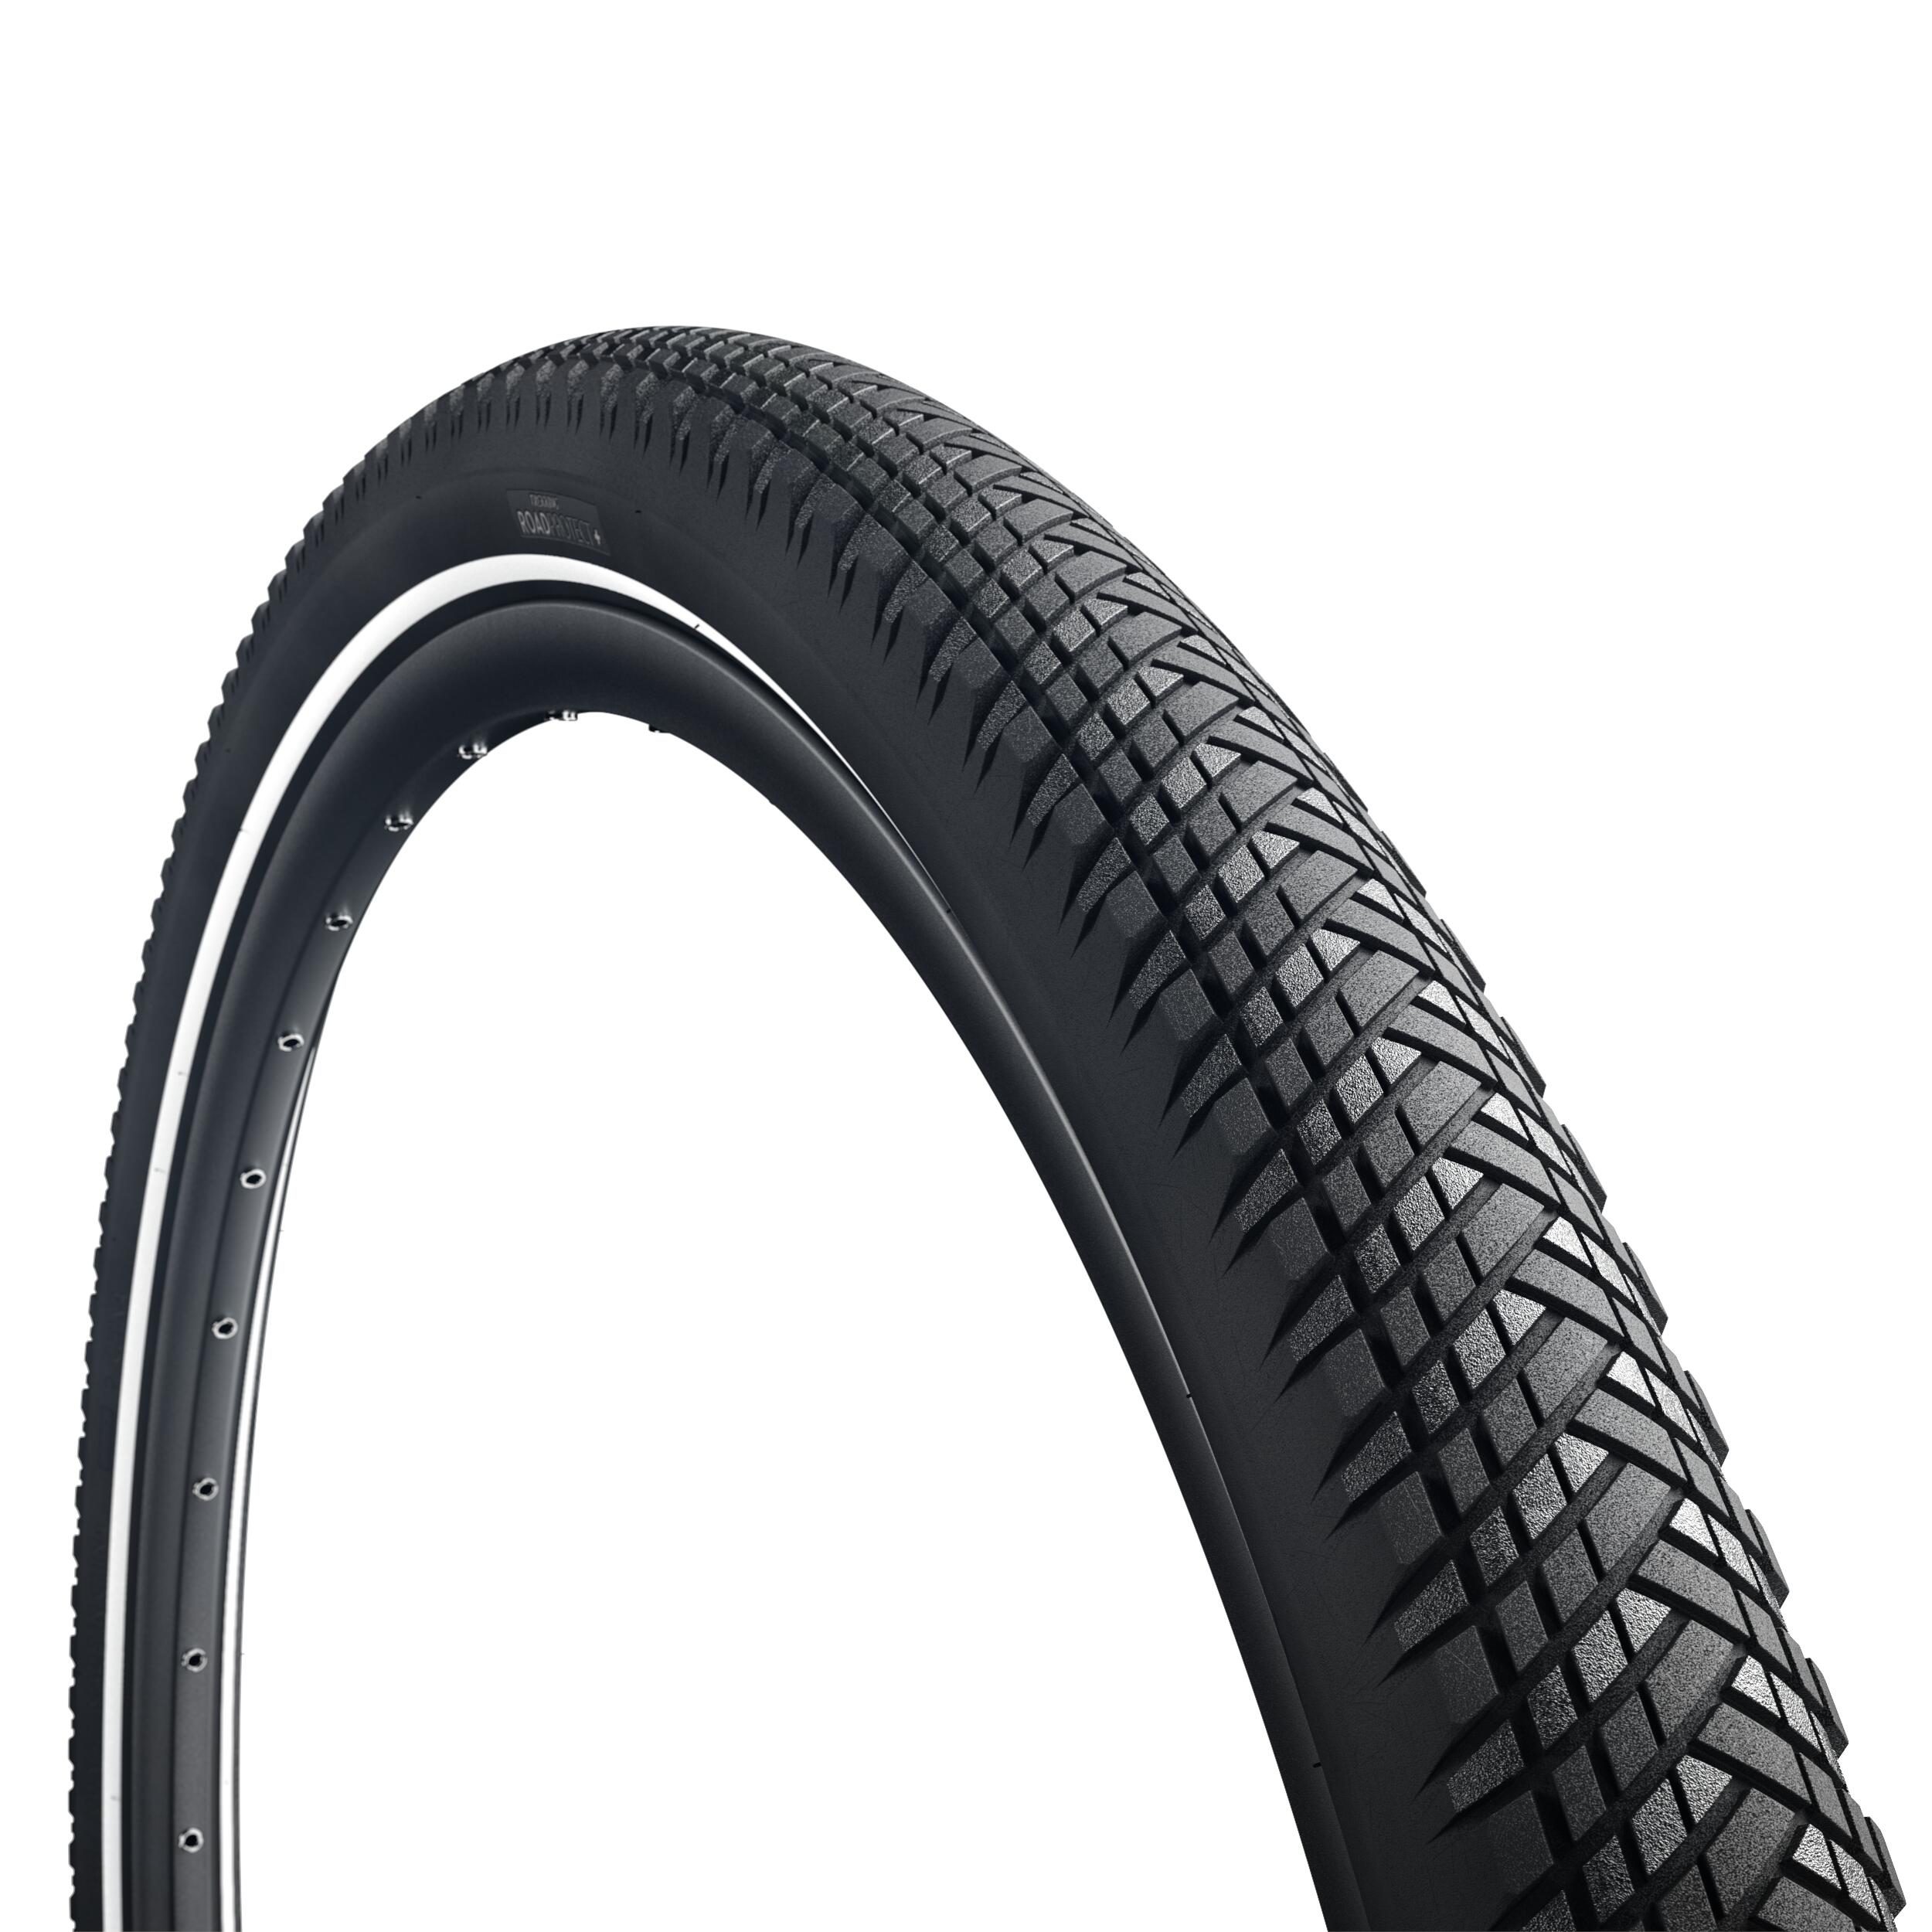 Puncture-Proof Hybrid Electric Bike Tyre RoadProtect+ 700 x 47 mm 1/4